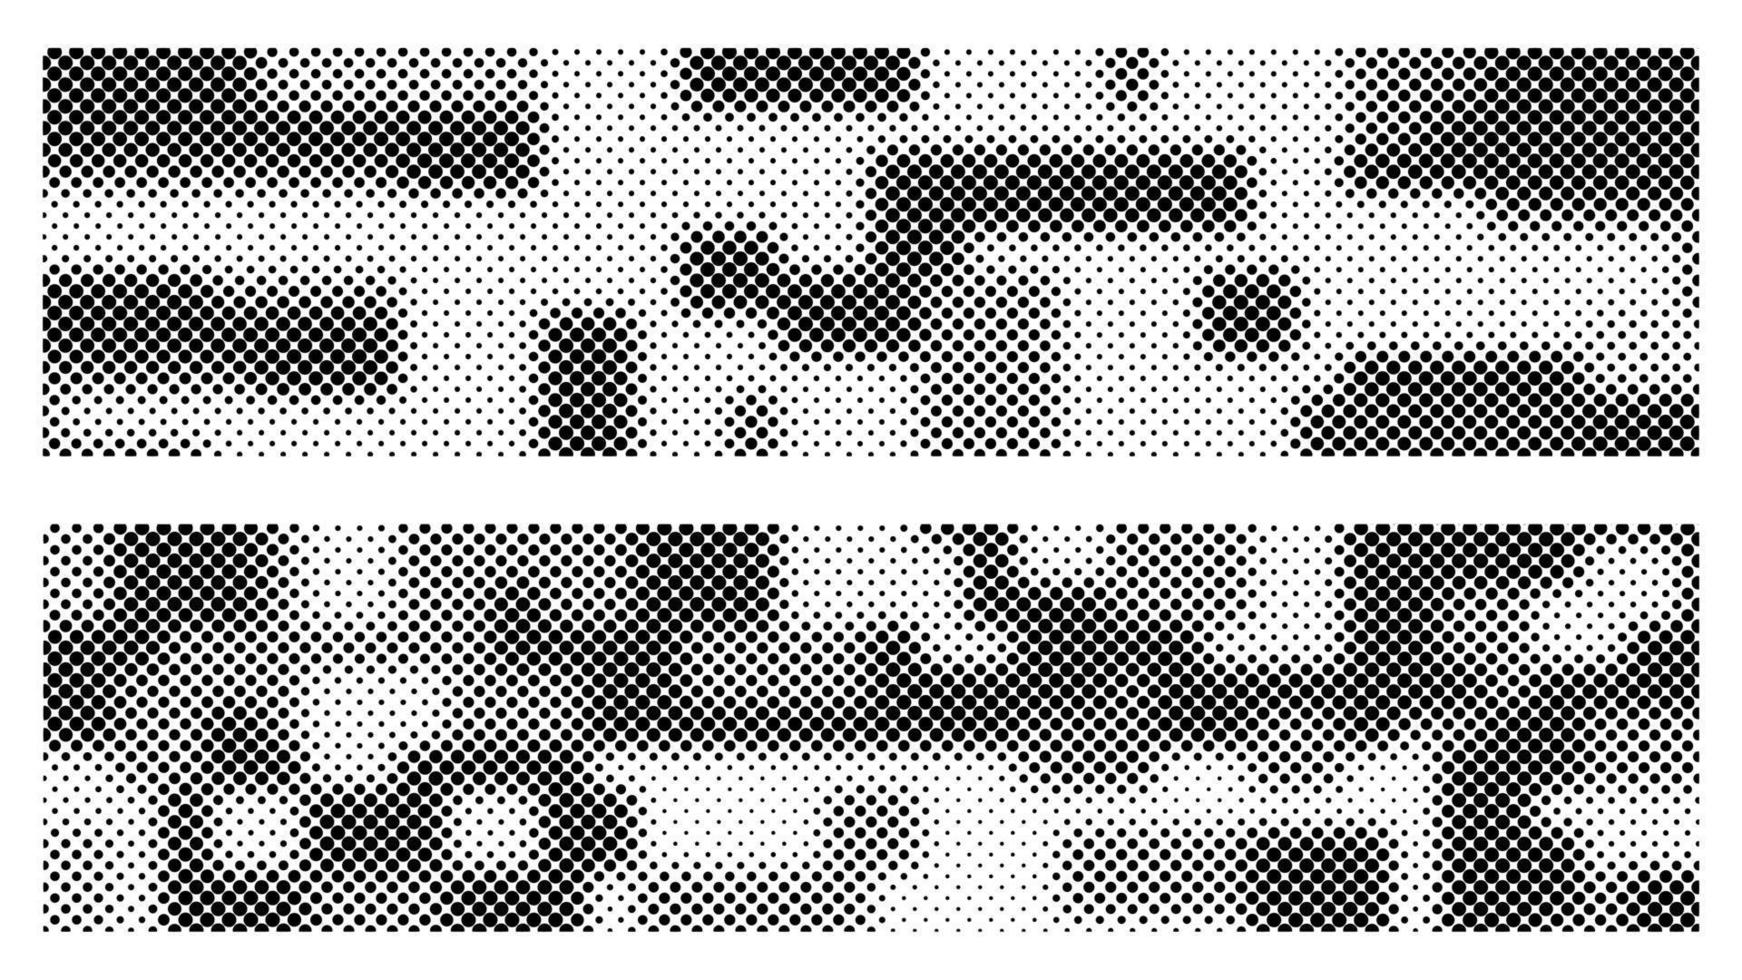 Halftone famouflage pattern background vector, abstract banner template with black and white color halftone effect vector